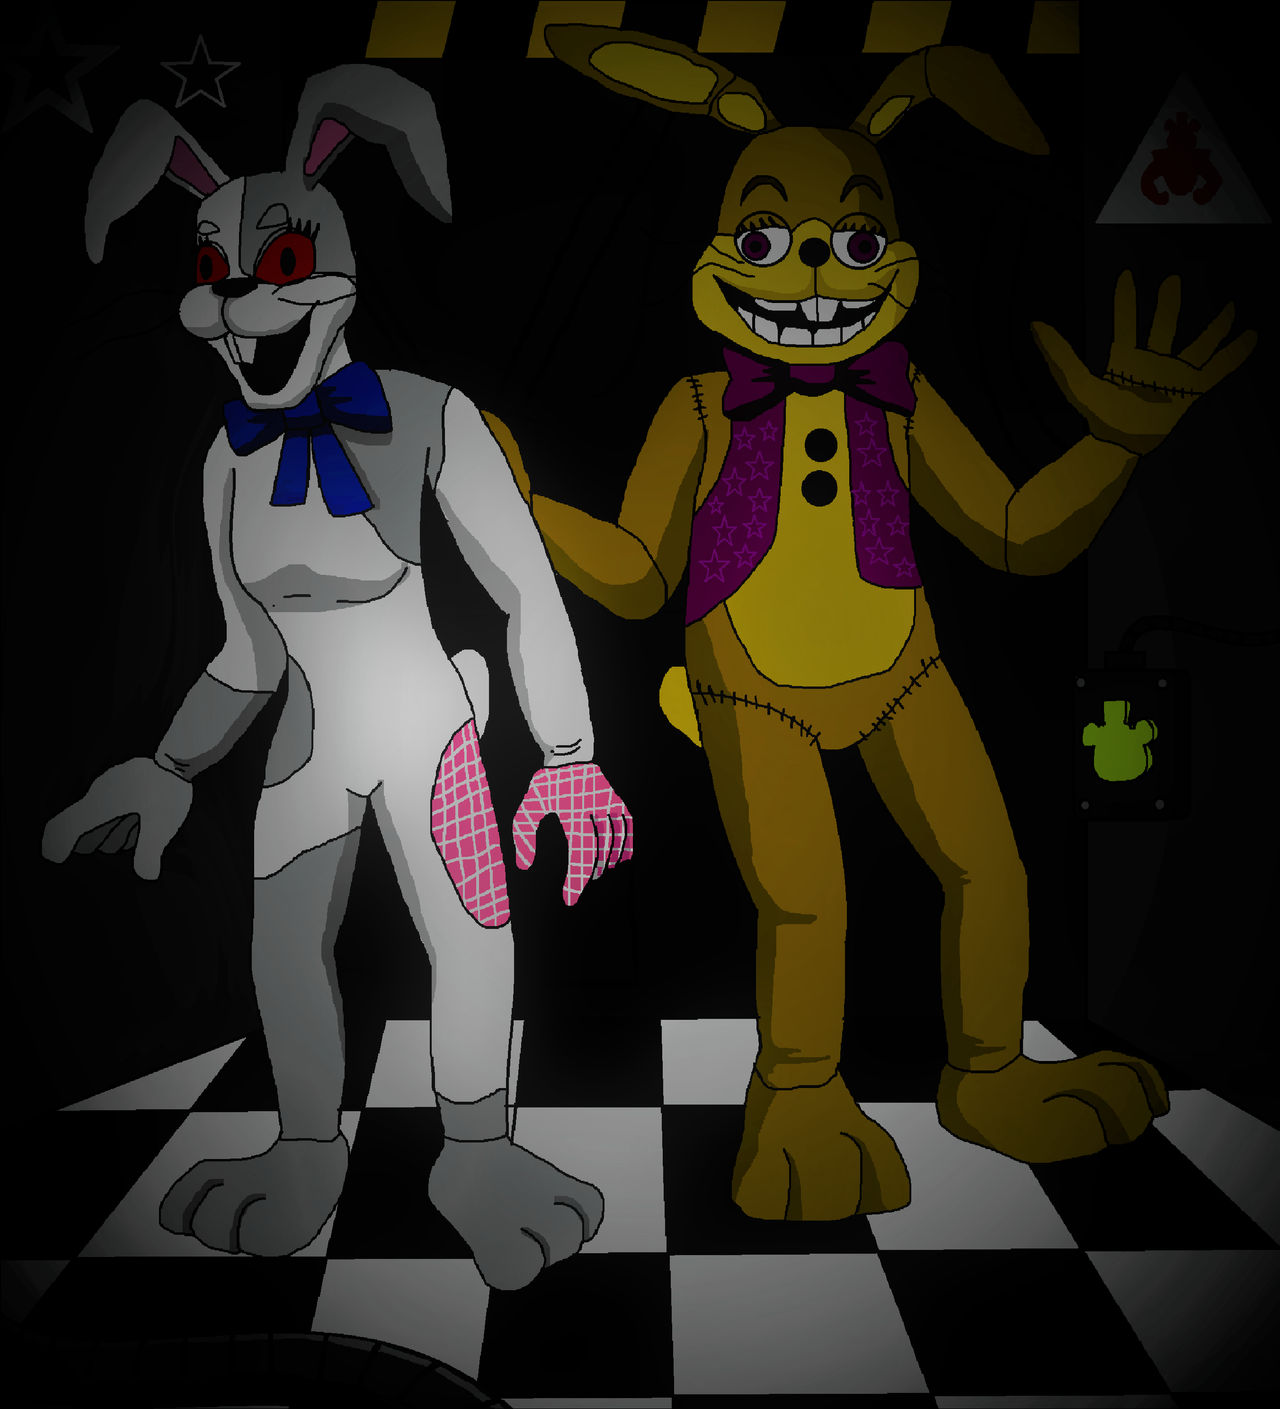 ZomBunny Creations - Vanny loves taking pictures with glitchy boy